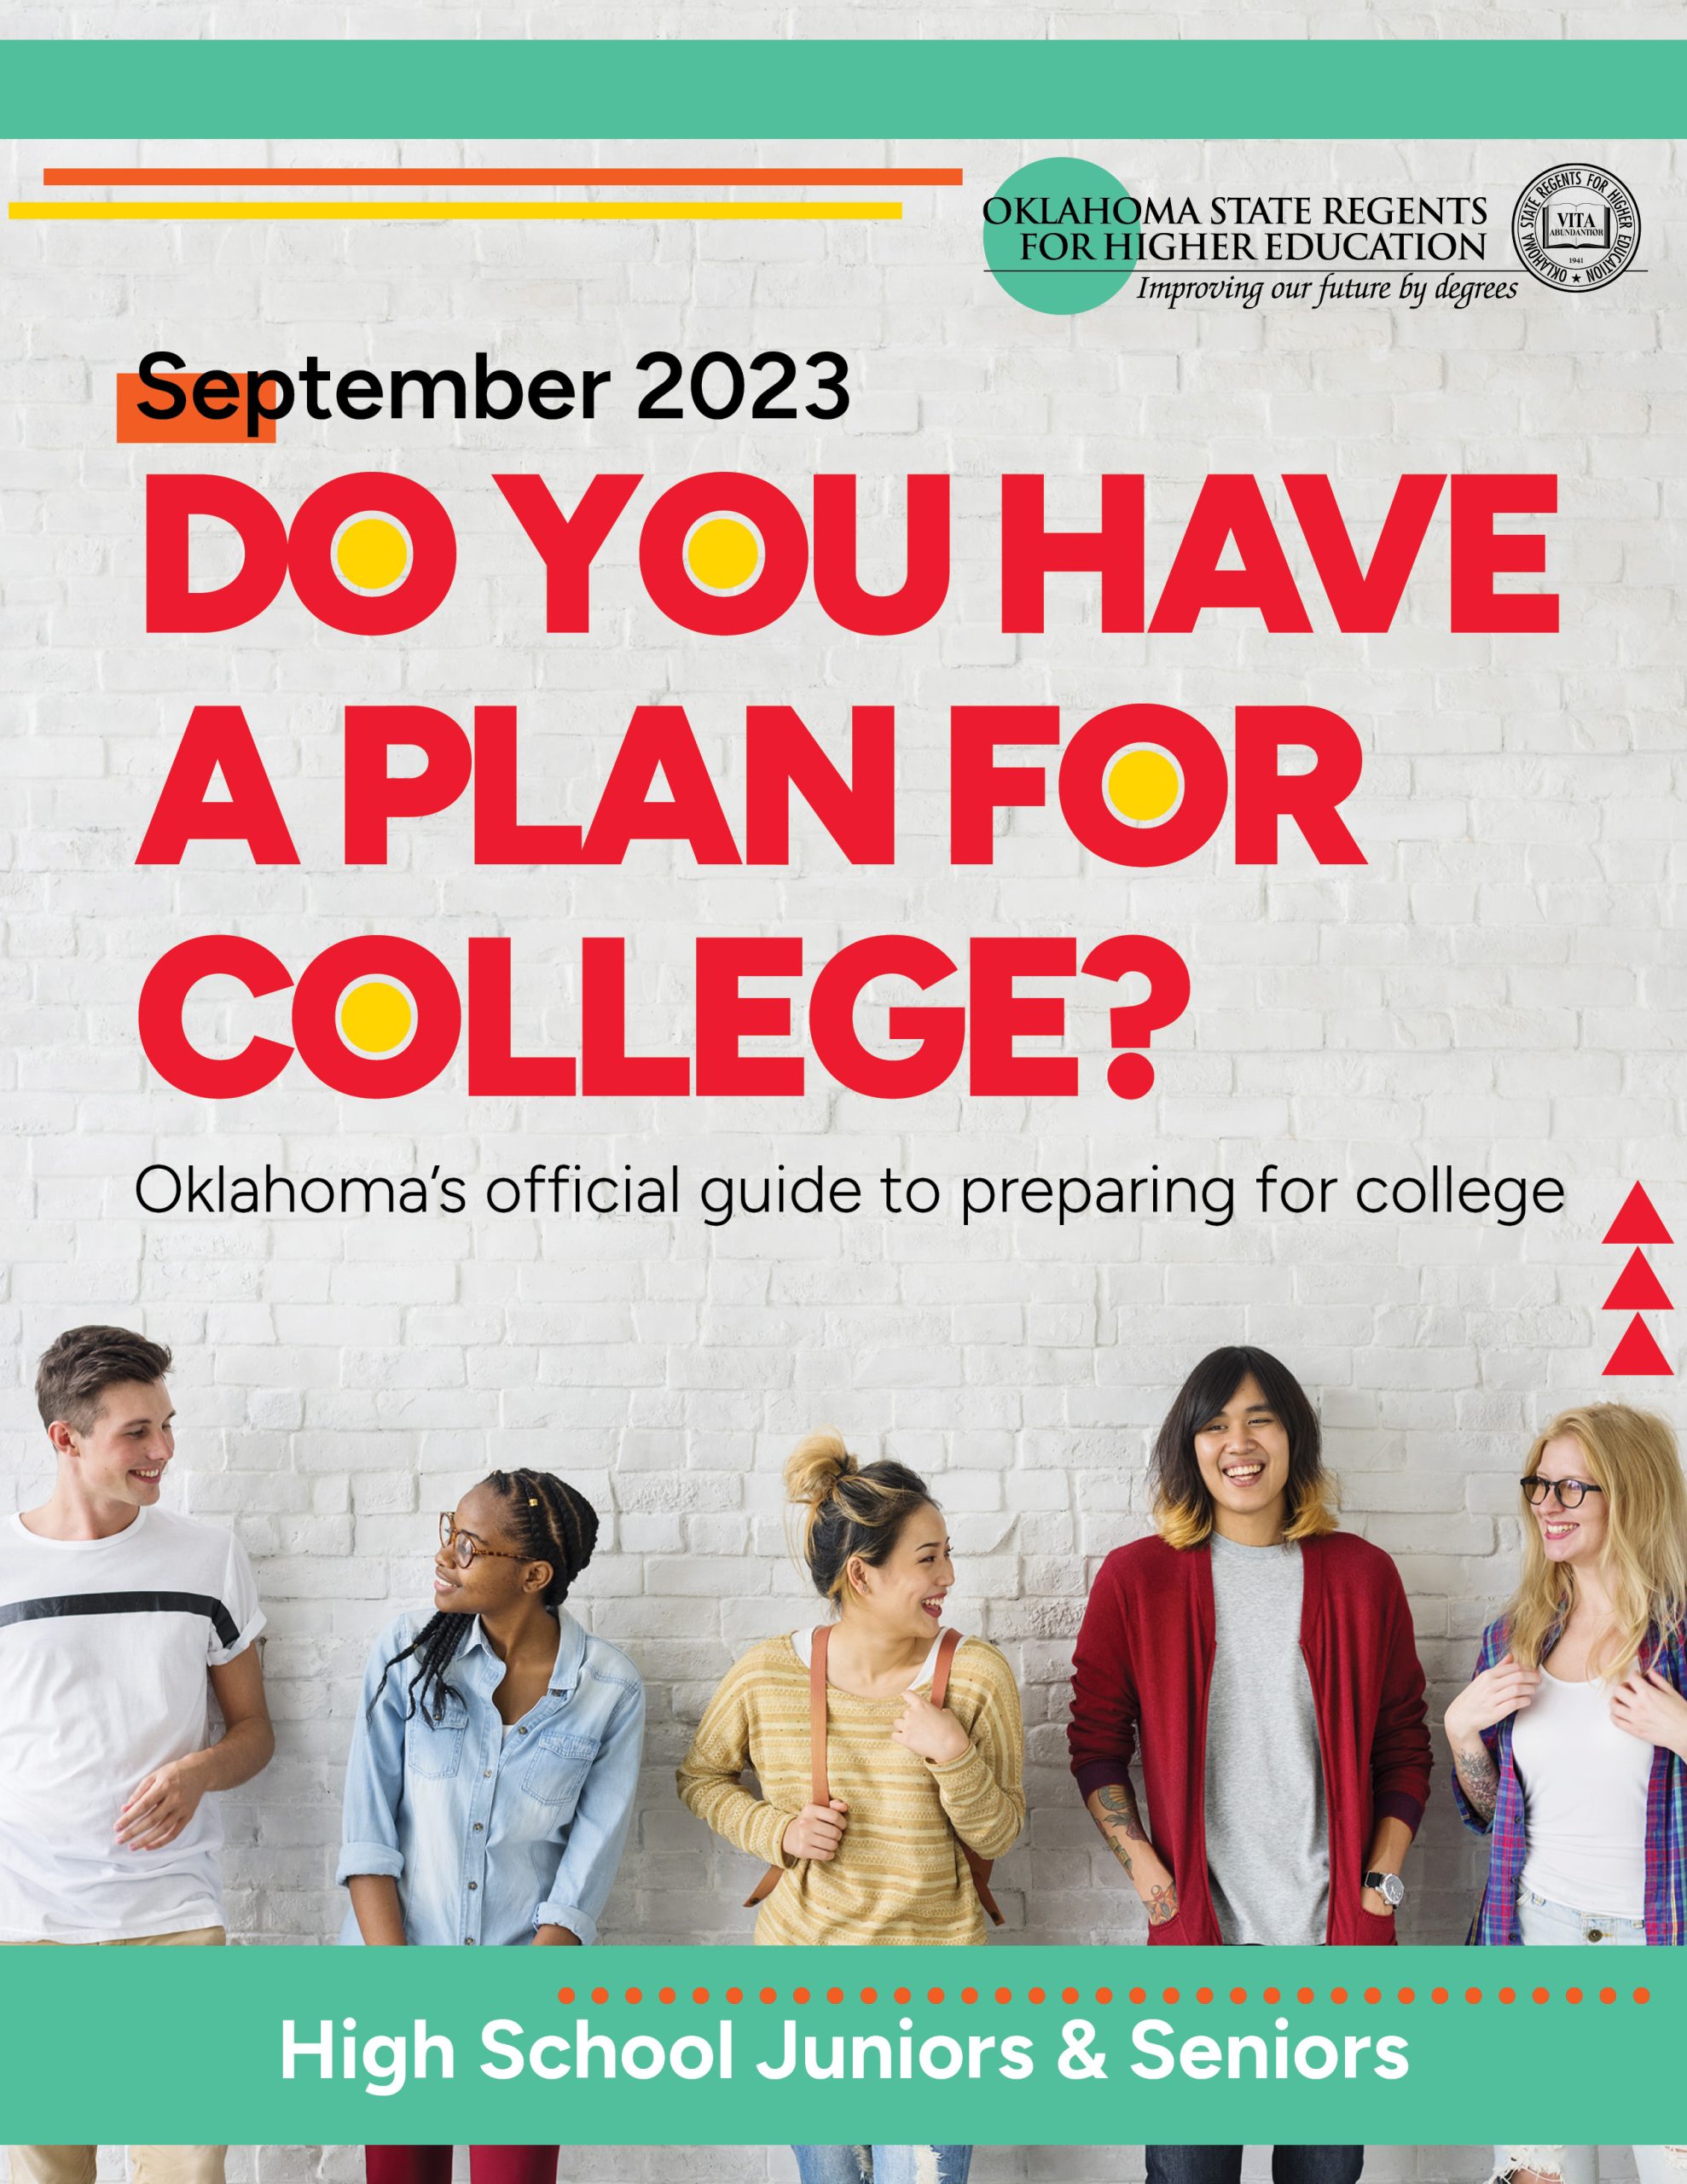 Do you have a plan for college?